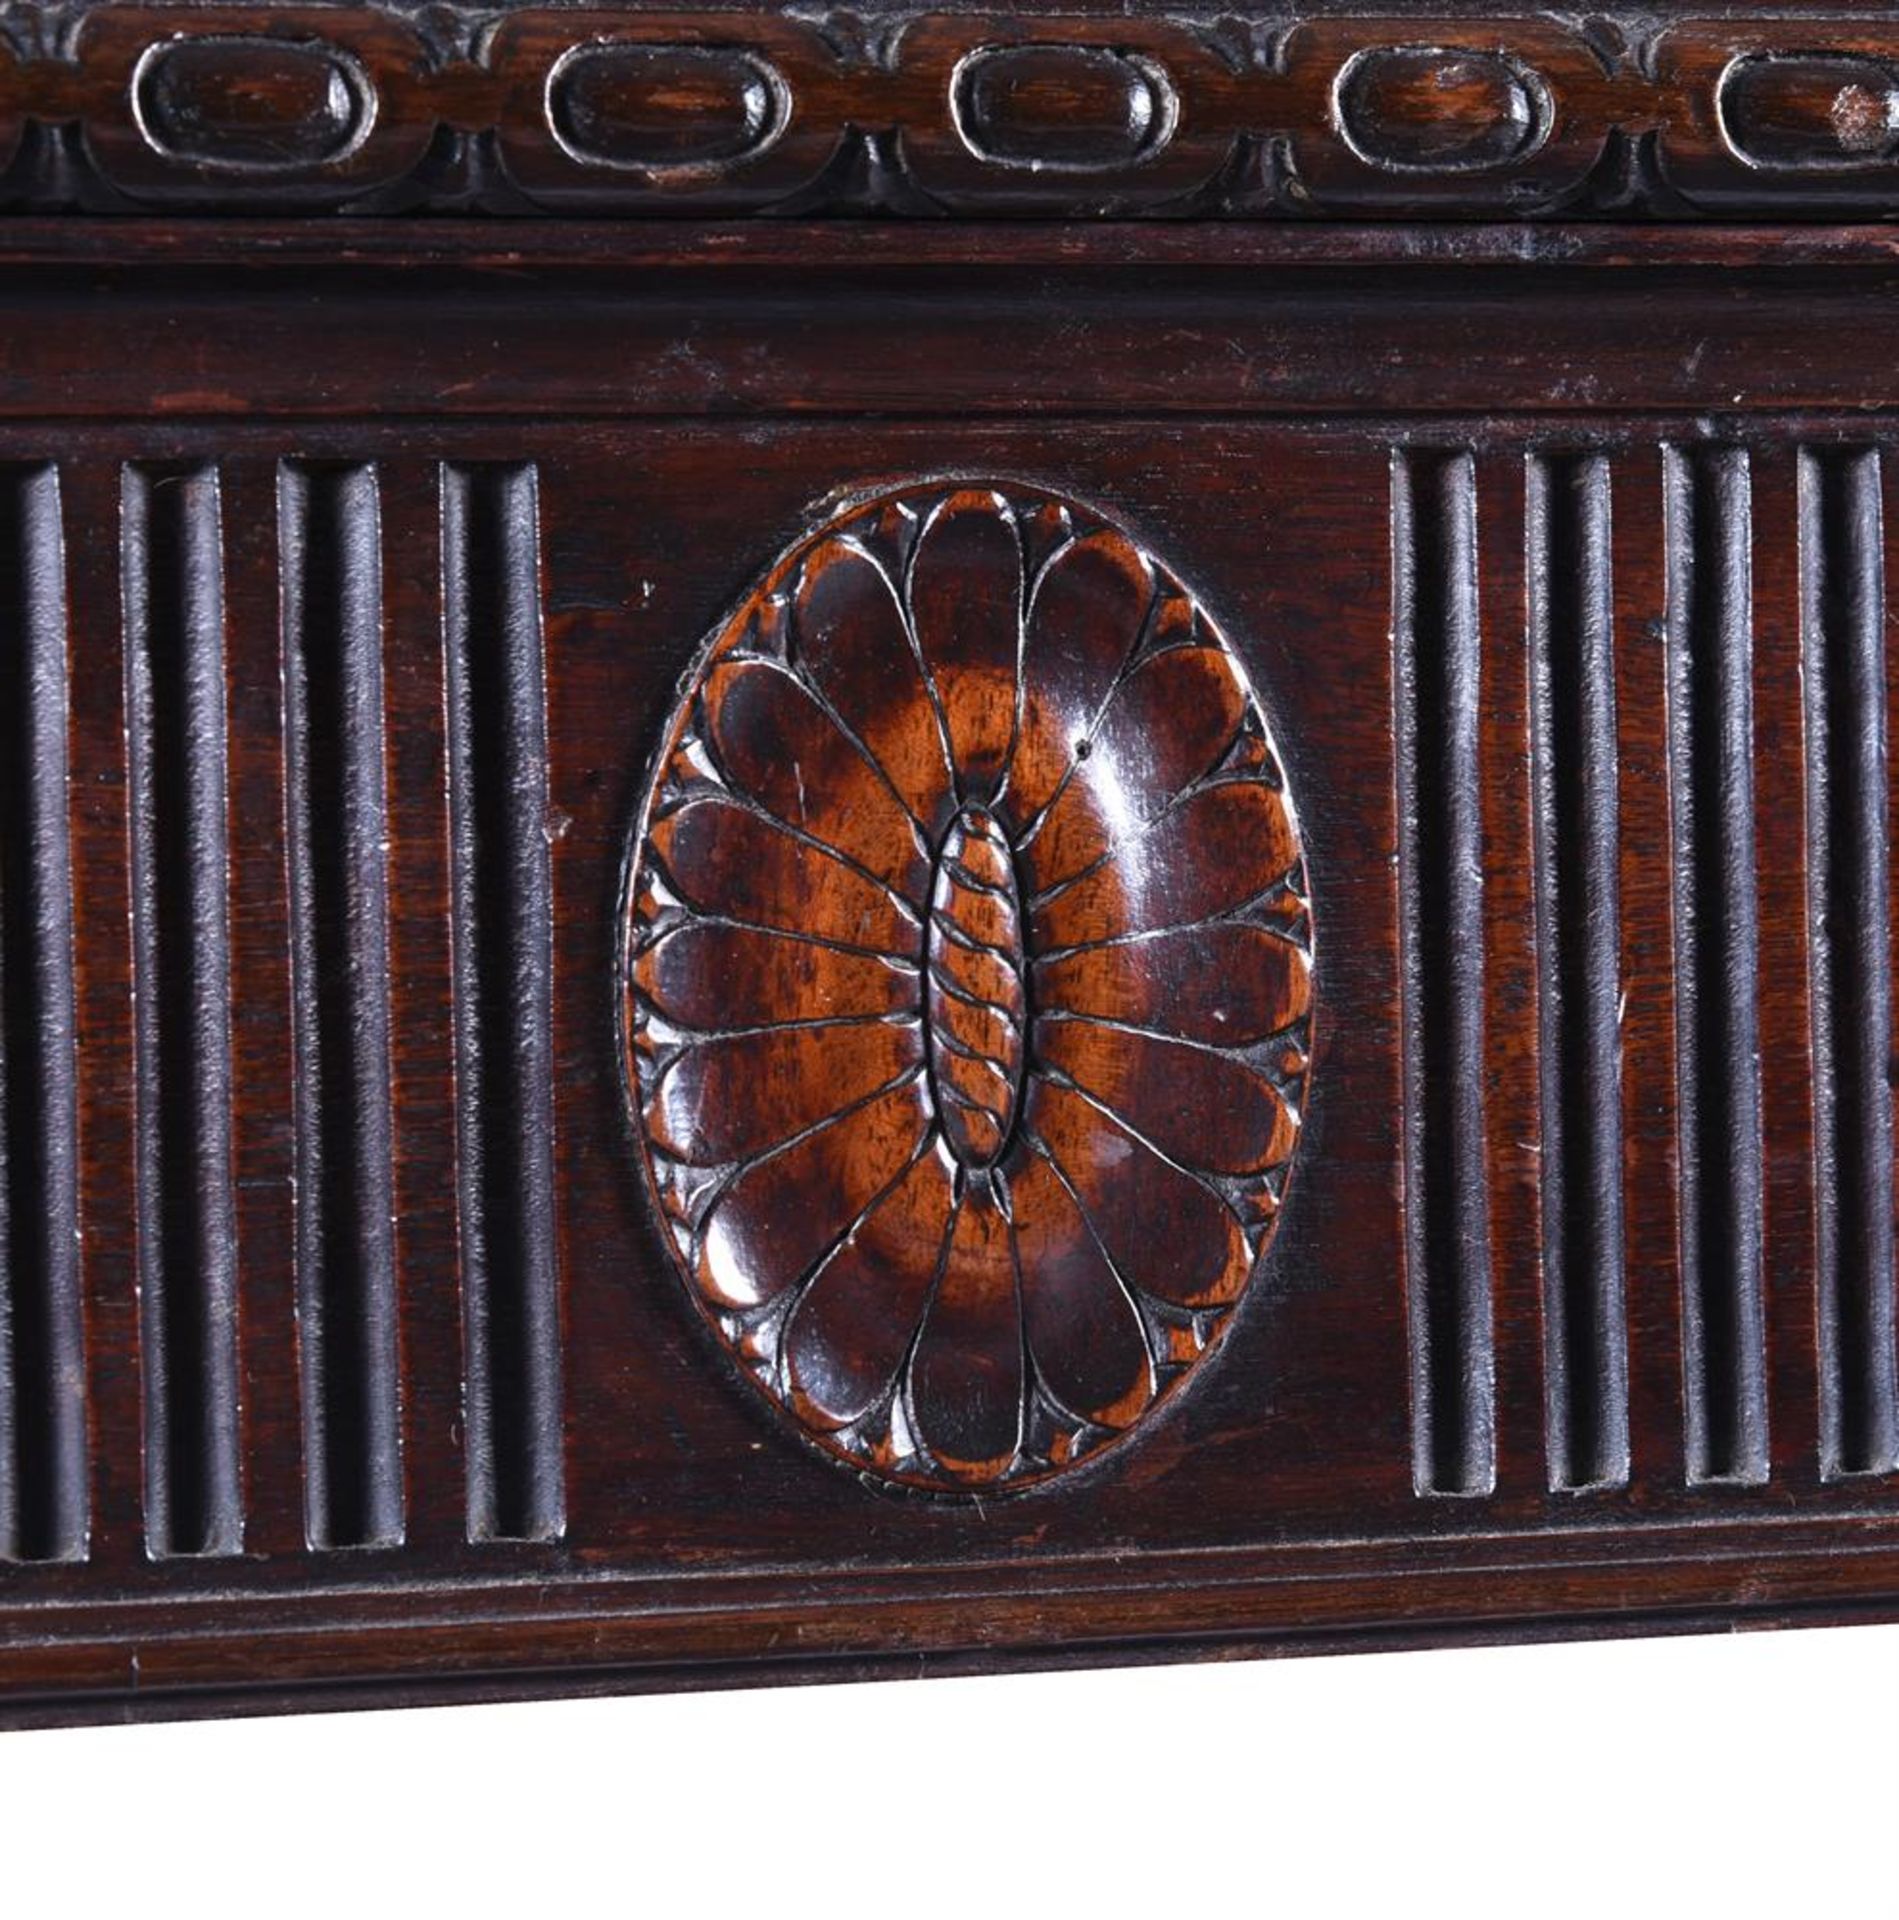 A MAHOGANY SERVING TABLE, IN THE MANNER OF INCE & MAYHEW, LATE 18TH OR EARLY 19TH CENTURY - Image 2 of 4